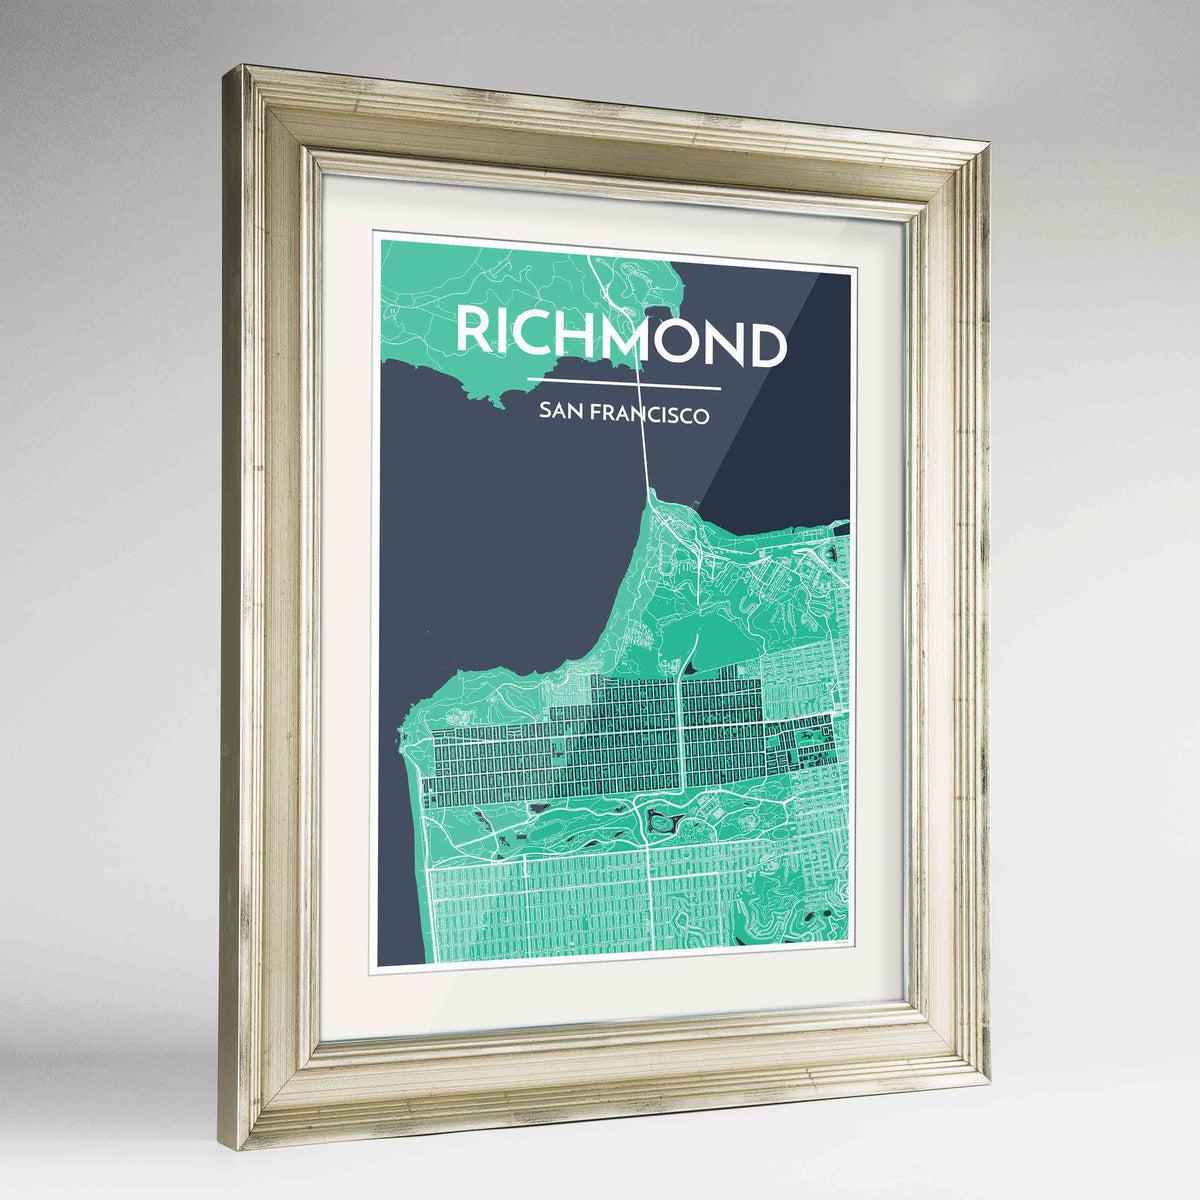 Framed The Richmond District San Francisco Map Art Print 24x36&quot; Champagne frame Point Two Design Group